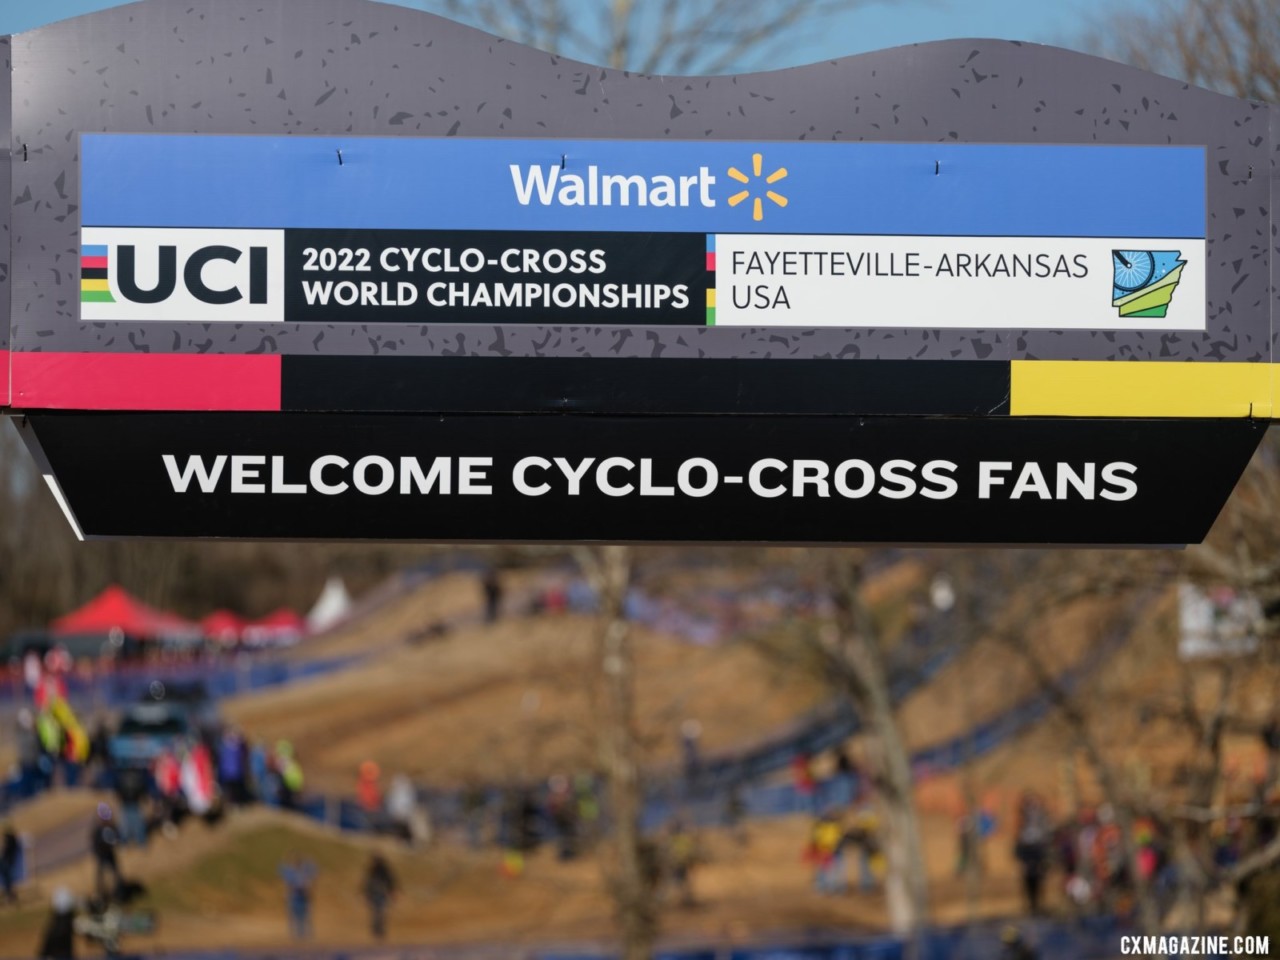 A reported $70 million from Walmart ensured title sponsorship. 2022 Cyclocross World Championships, Fayetteville, Arkansas USA. © G. Gould / Cyclocross Magazine